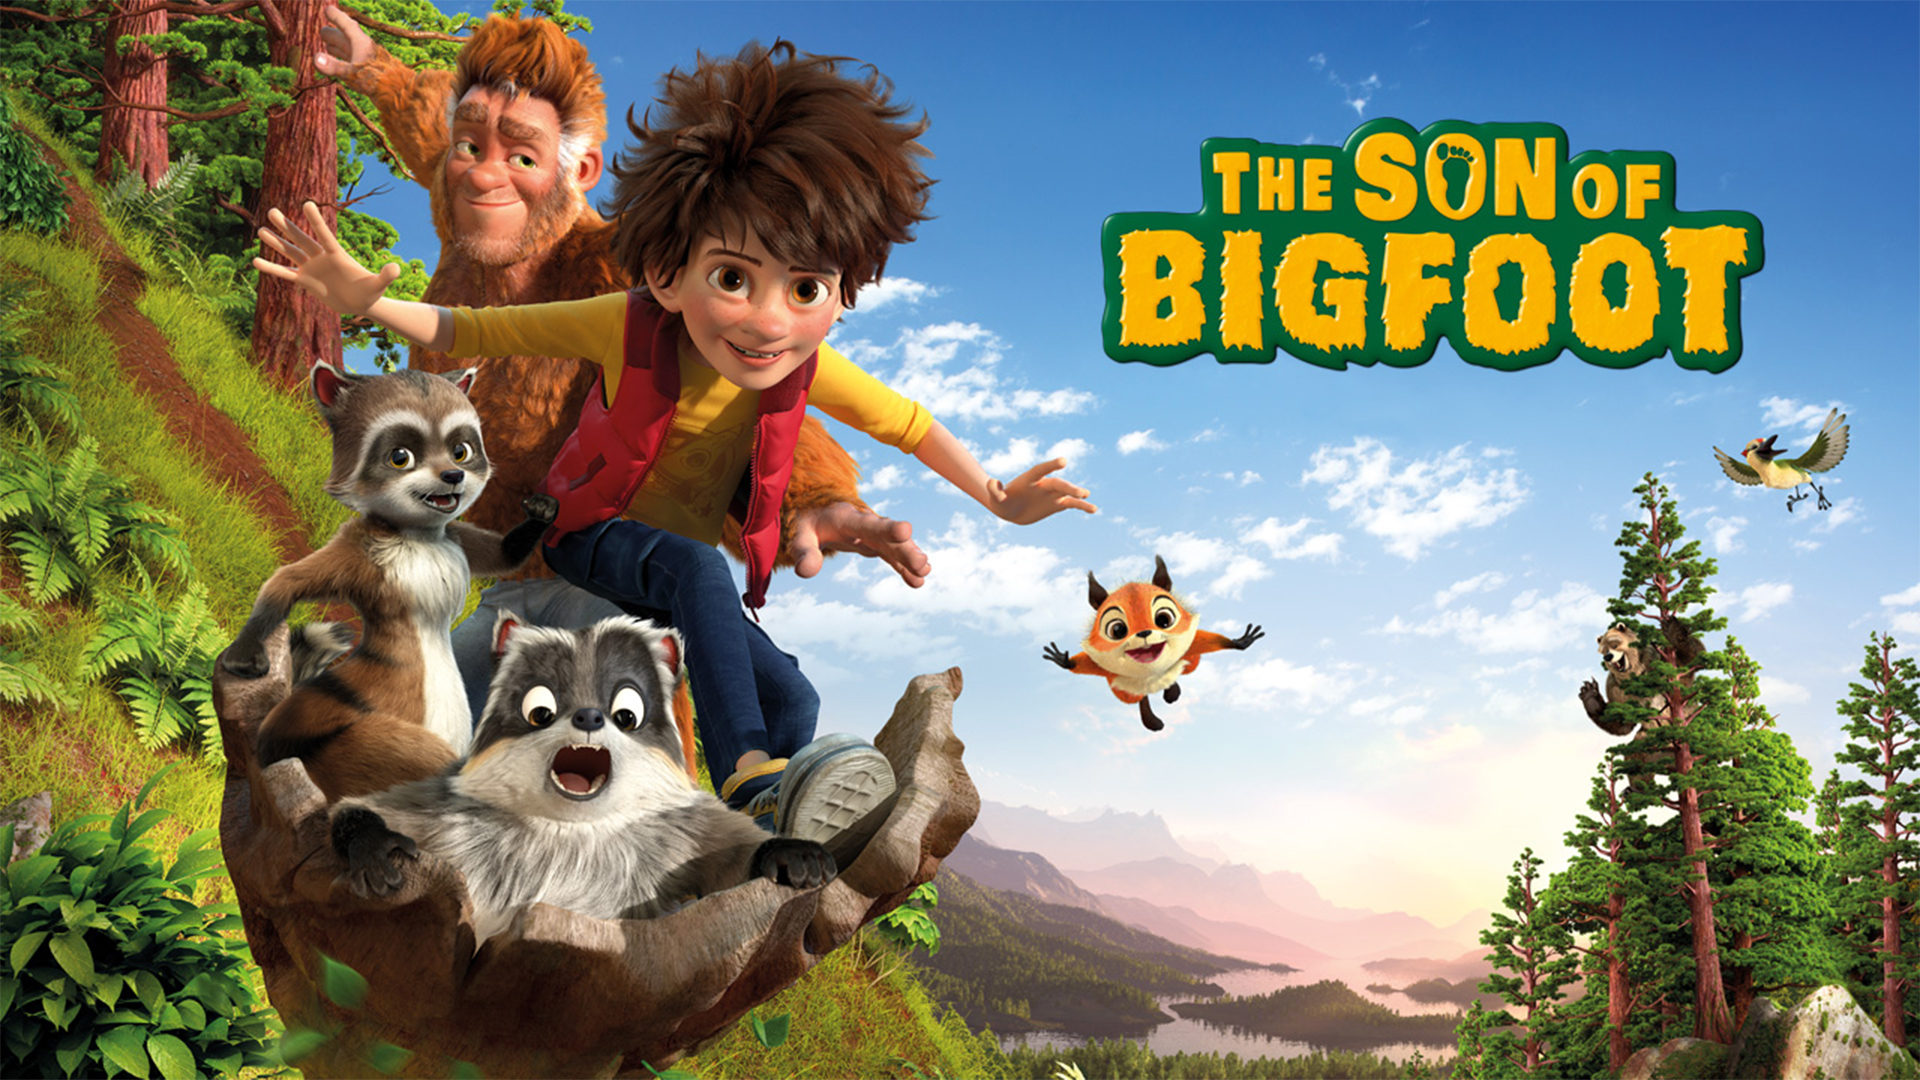 Watch The Son of Bigfoot Online with NEON